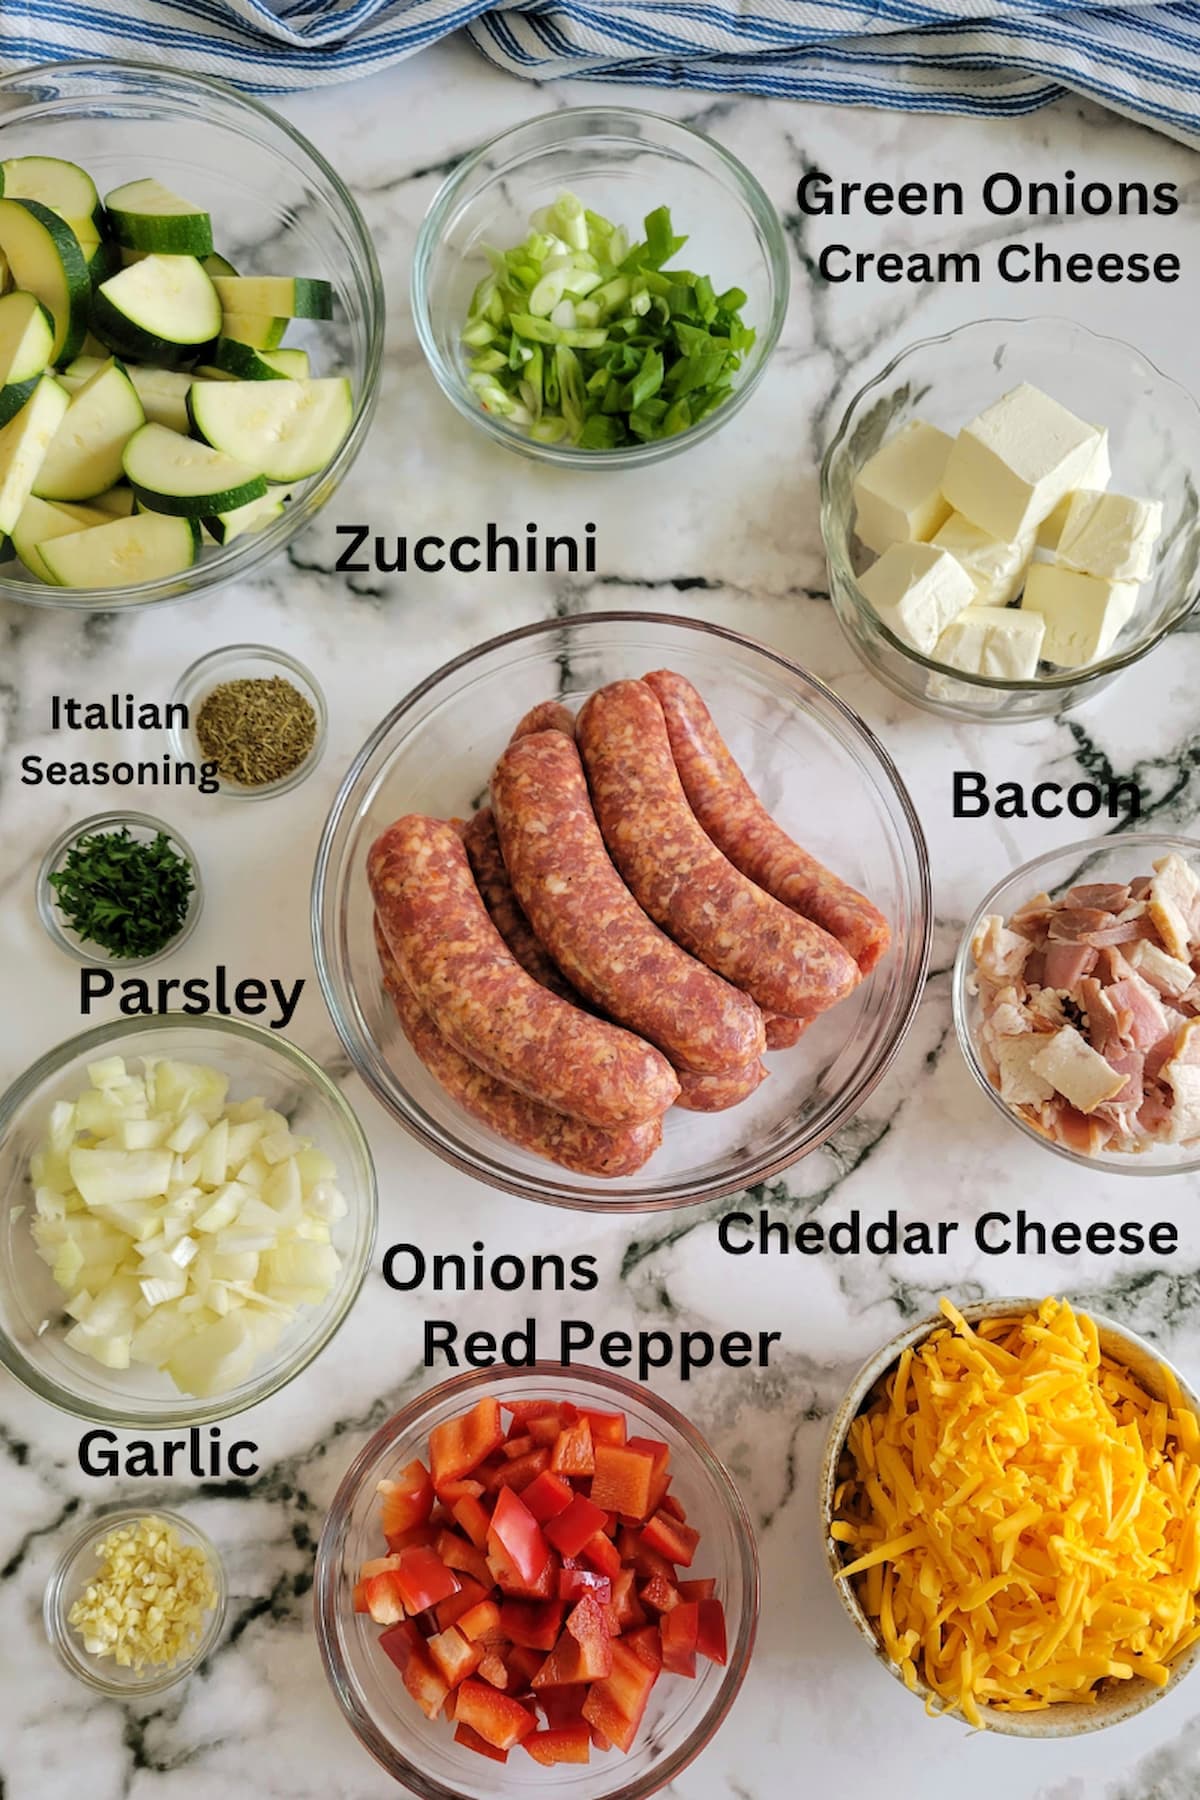 ingredients for sausage casserole with zucchini - zucchini, italian sausage, cheddar cheese, cream cheese, parsley, green onions, onions, red pepper, garlic, bacon, italian seasoning